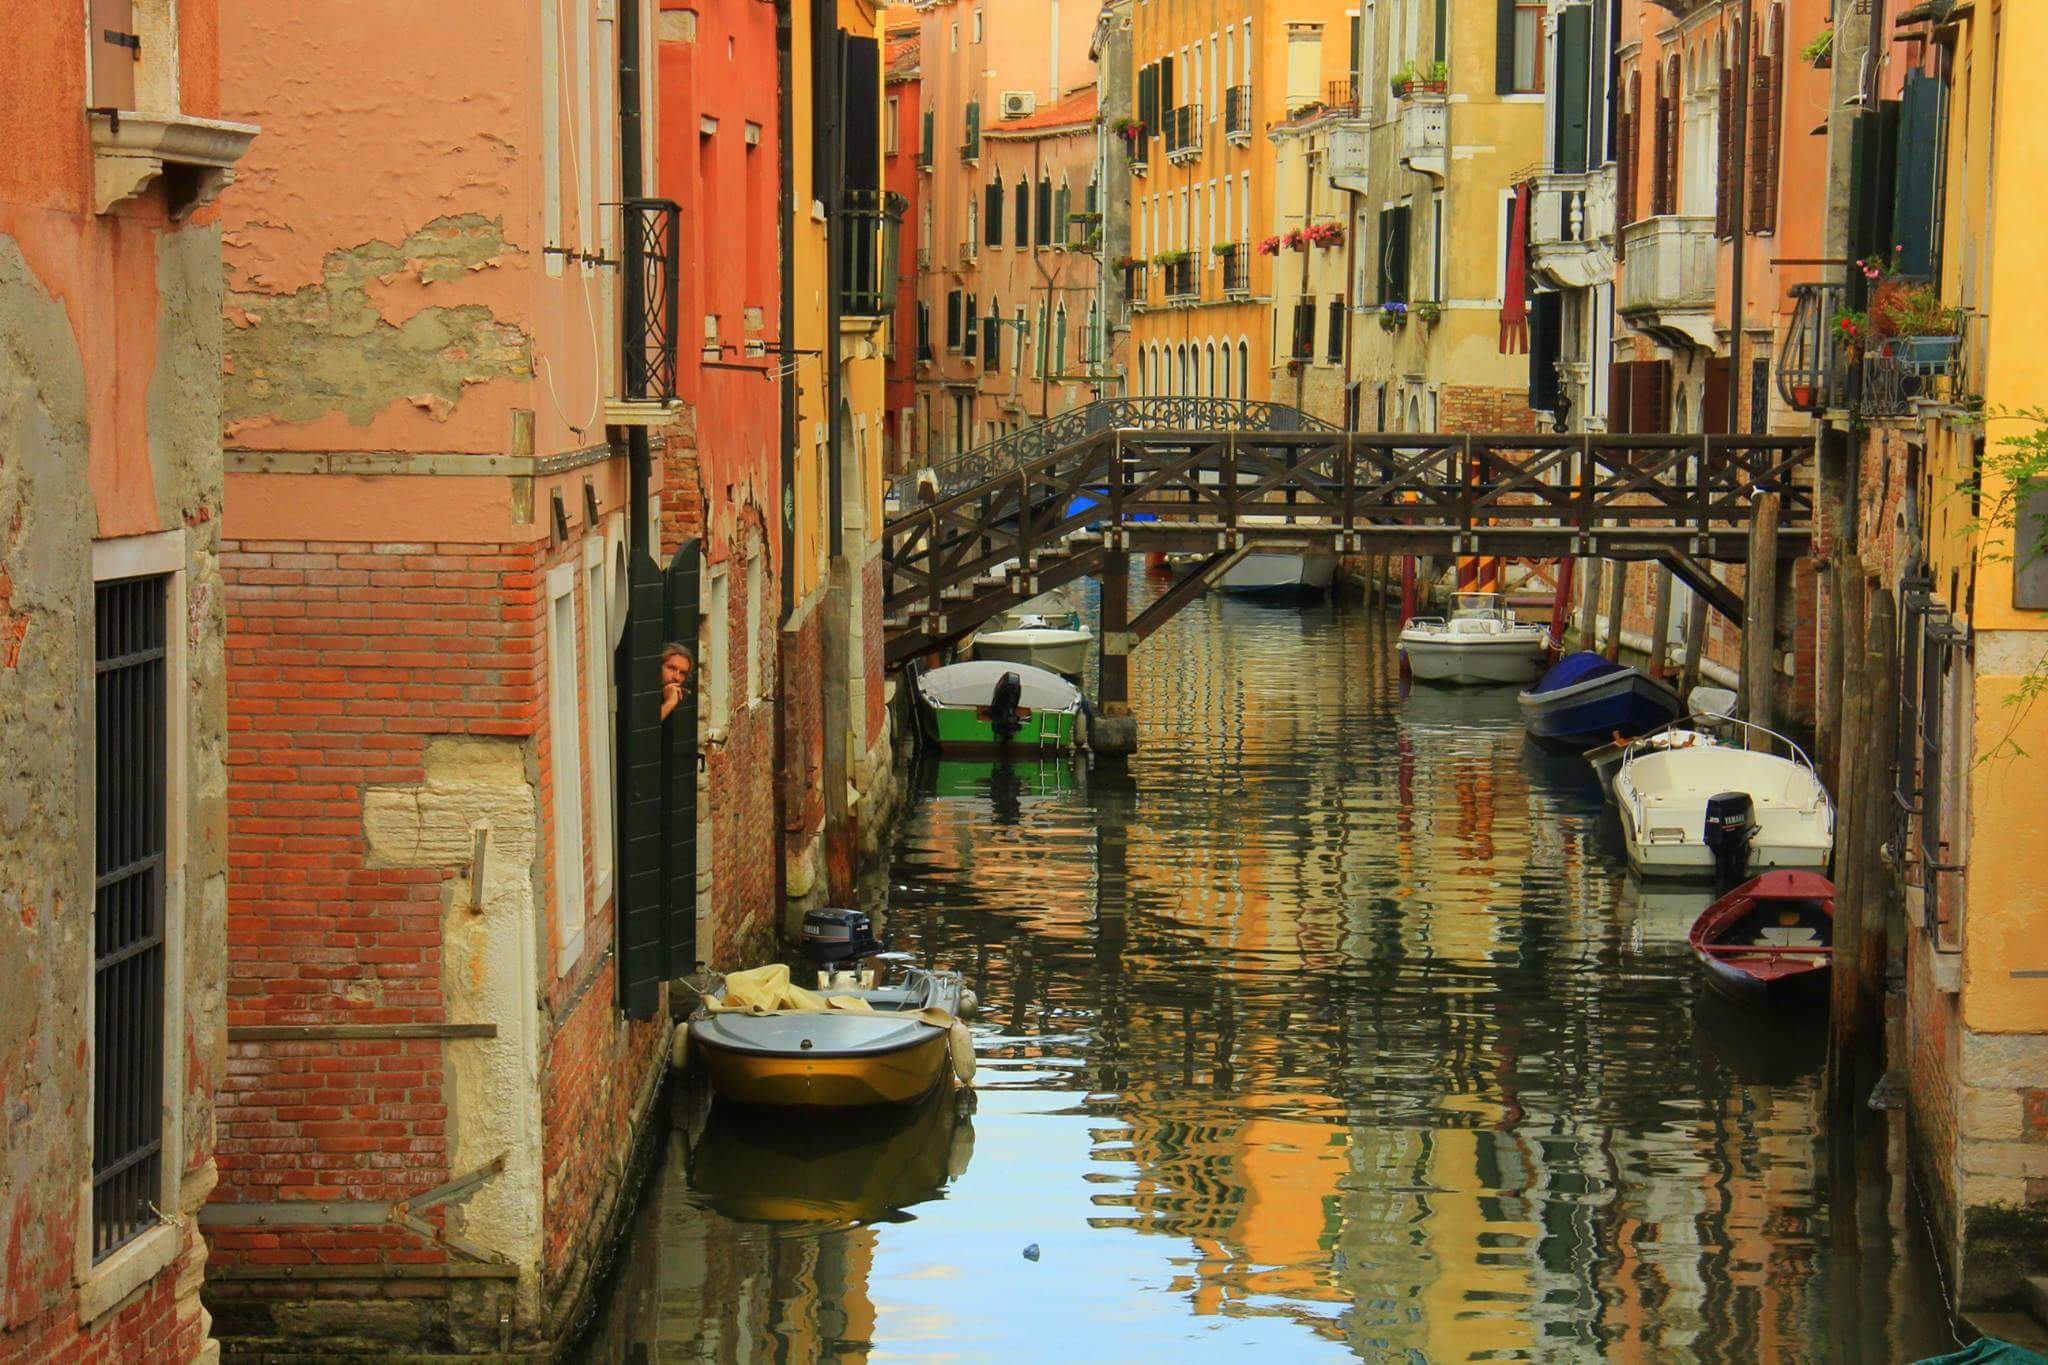 Reflections on a Venice canal